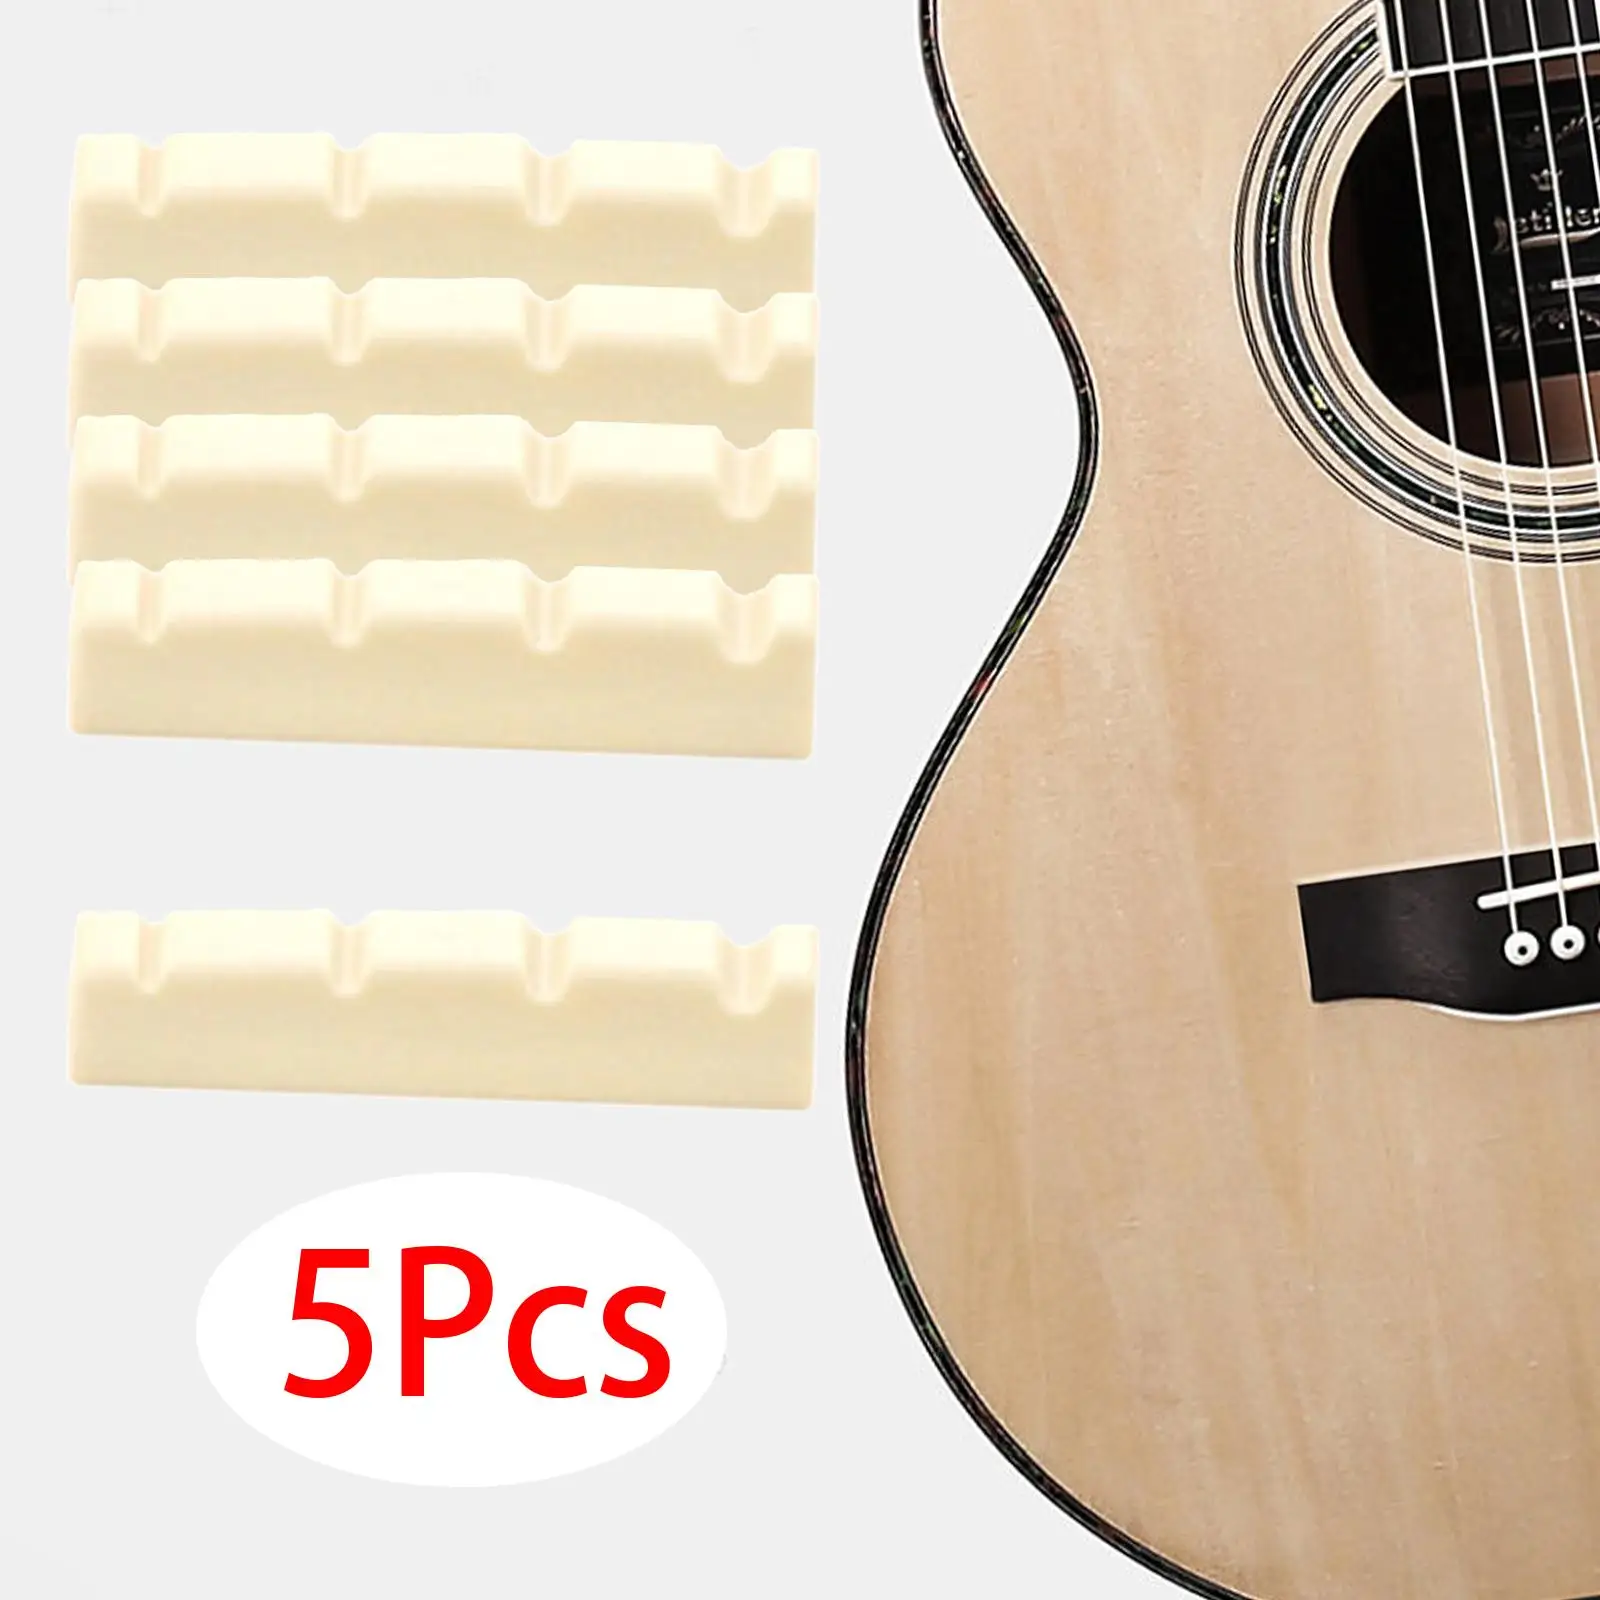 5Pcs Bass Guitar Nut Accessories Jazz 4 String Portable DIY String Instrument strings Replacement Parts for Bass Guitar